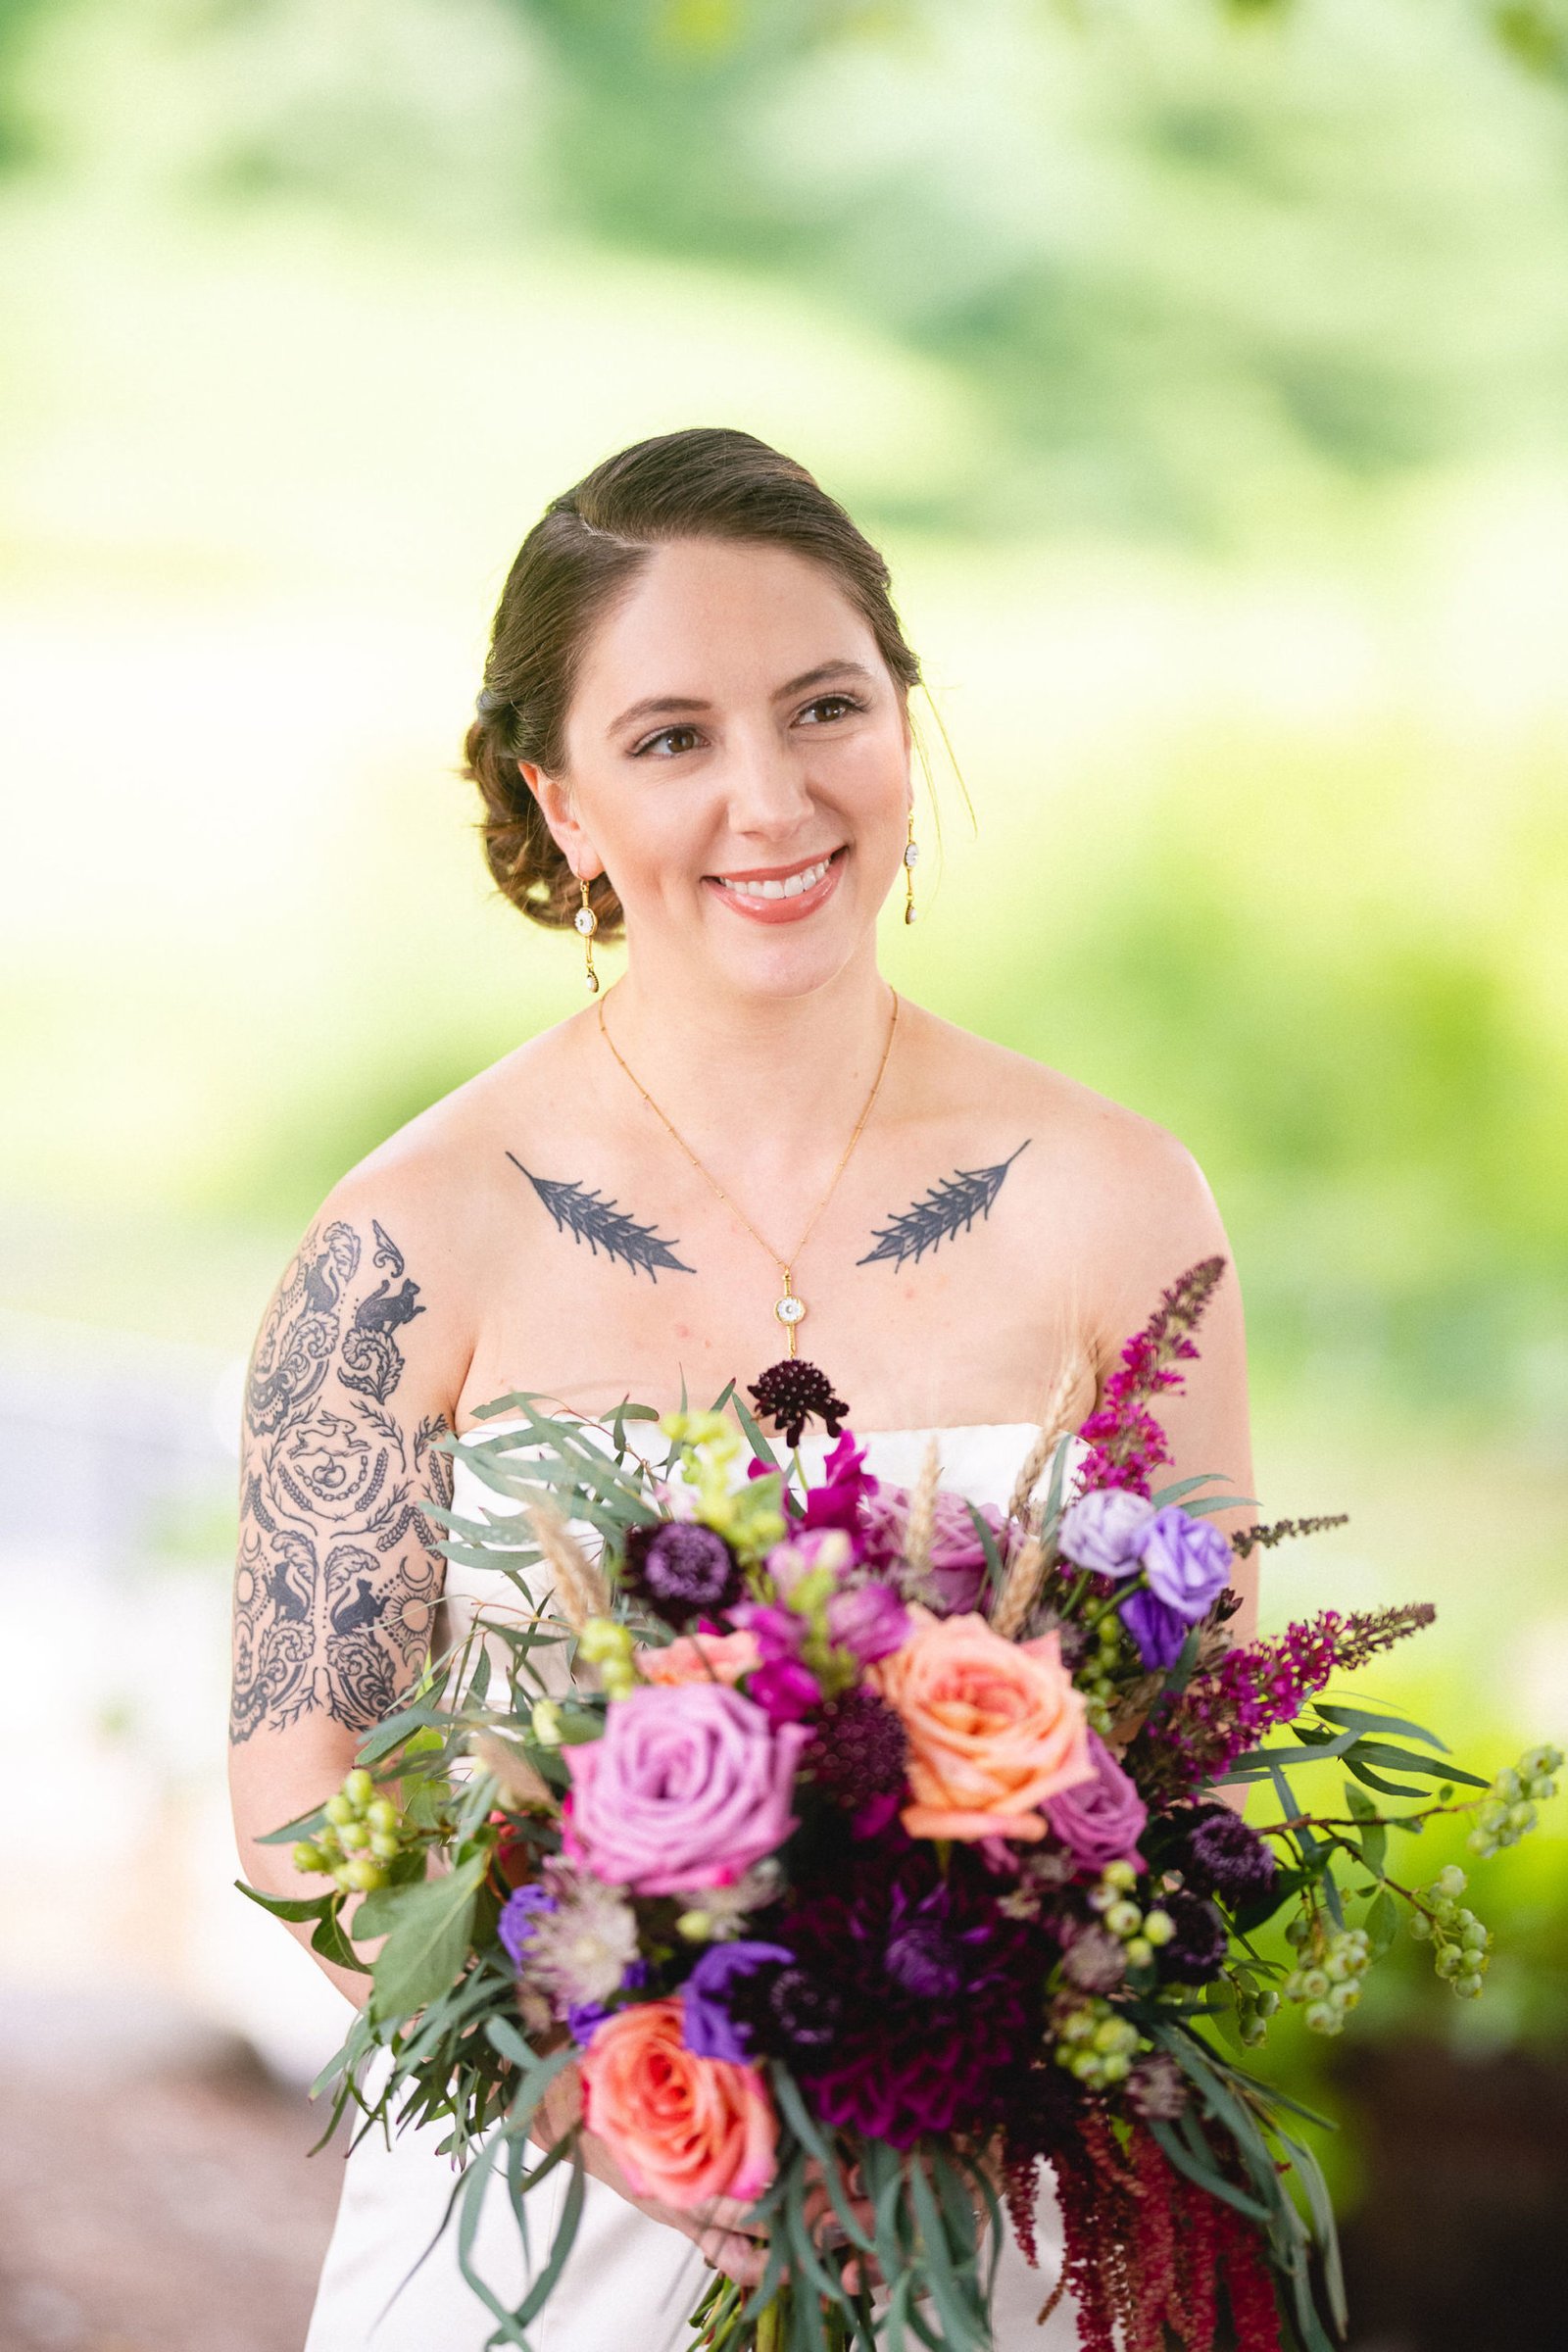 Jewel-toned Florals for a Sultry Summer Evening at Montague Retreat Center